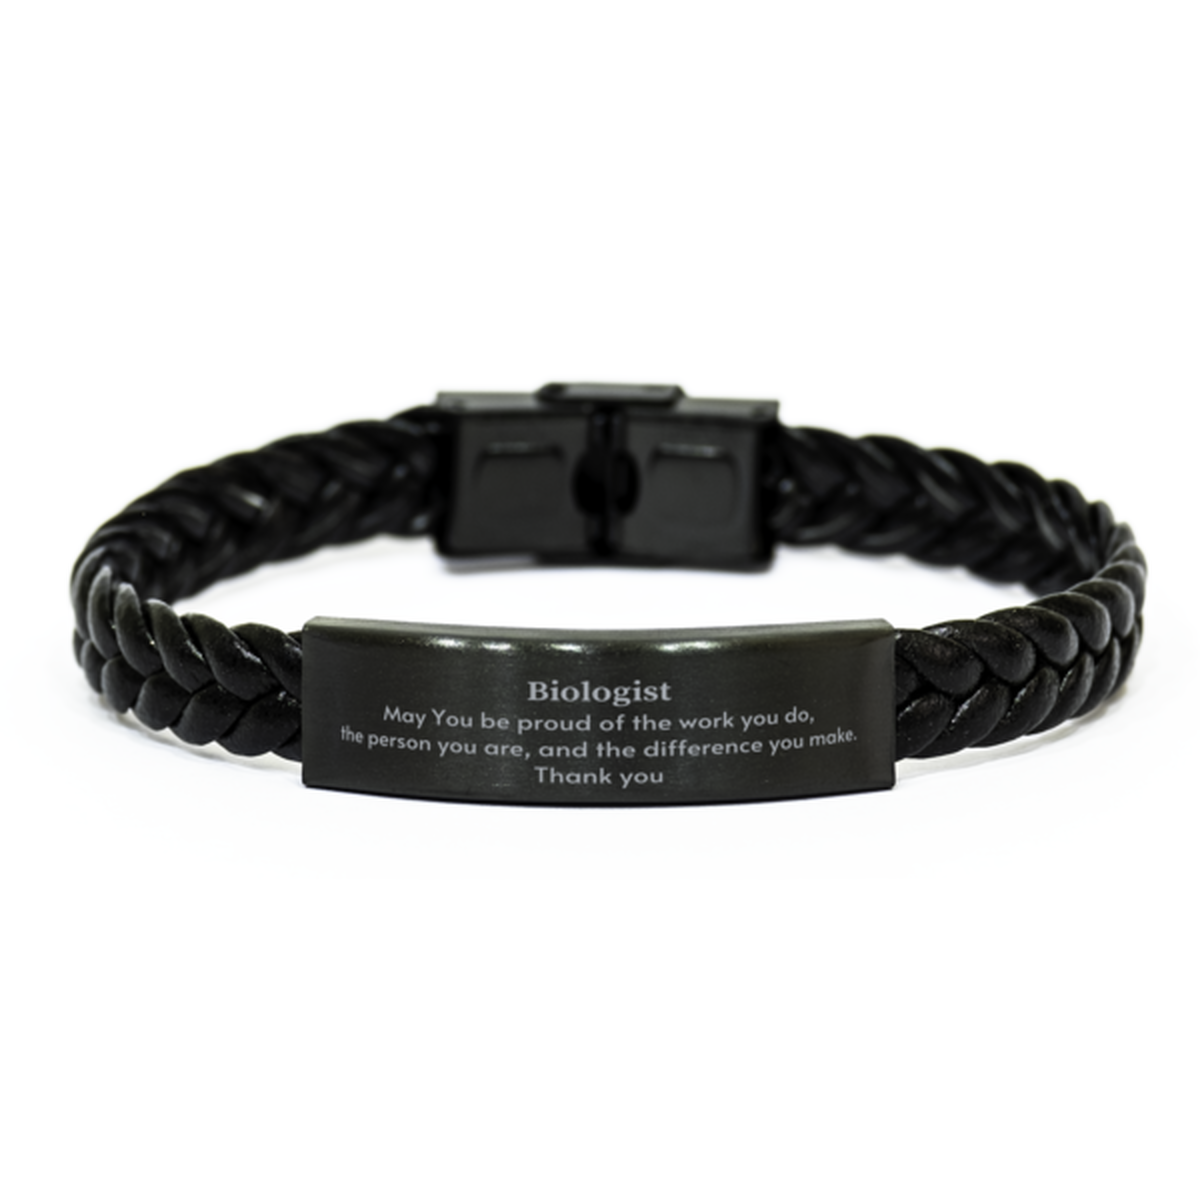 Heartwarming Braided Leather Bracelet Retirement Coworkers Gifts for Biologist, Biologist May You be proud of the work you do, the person you are Gifts for Boss Men Women Friends